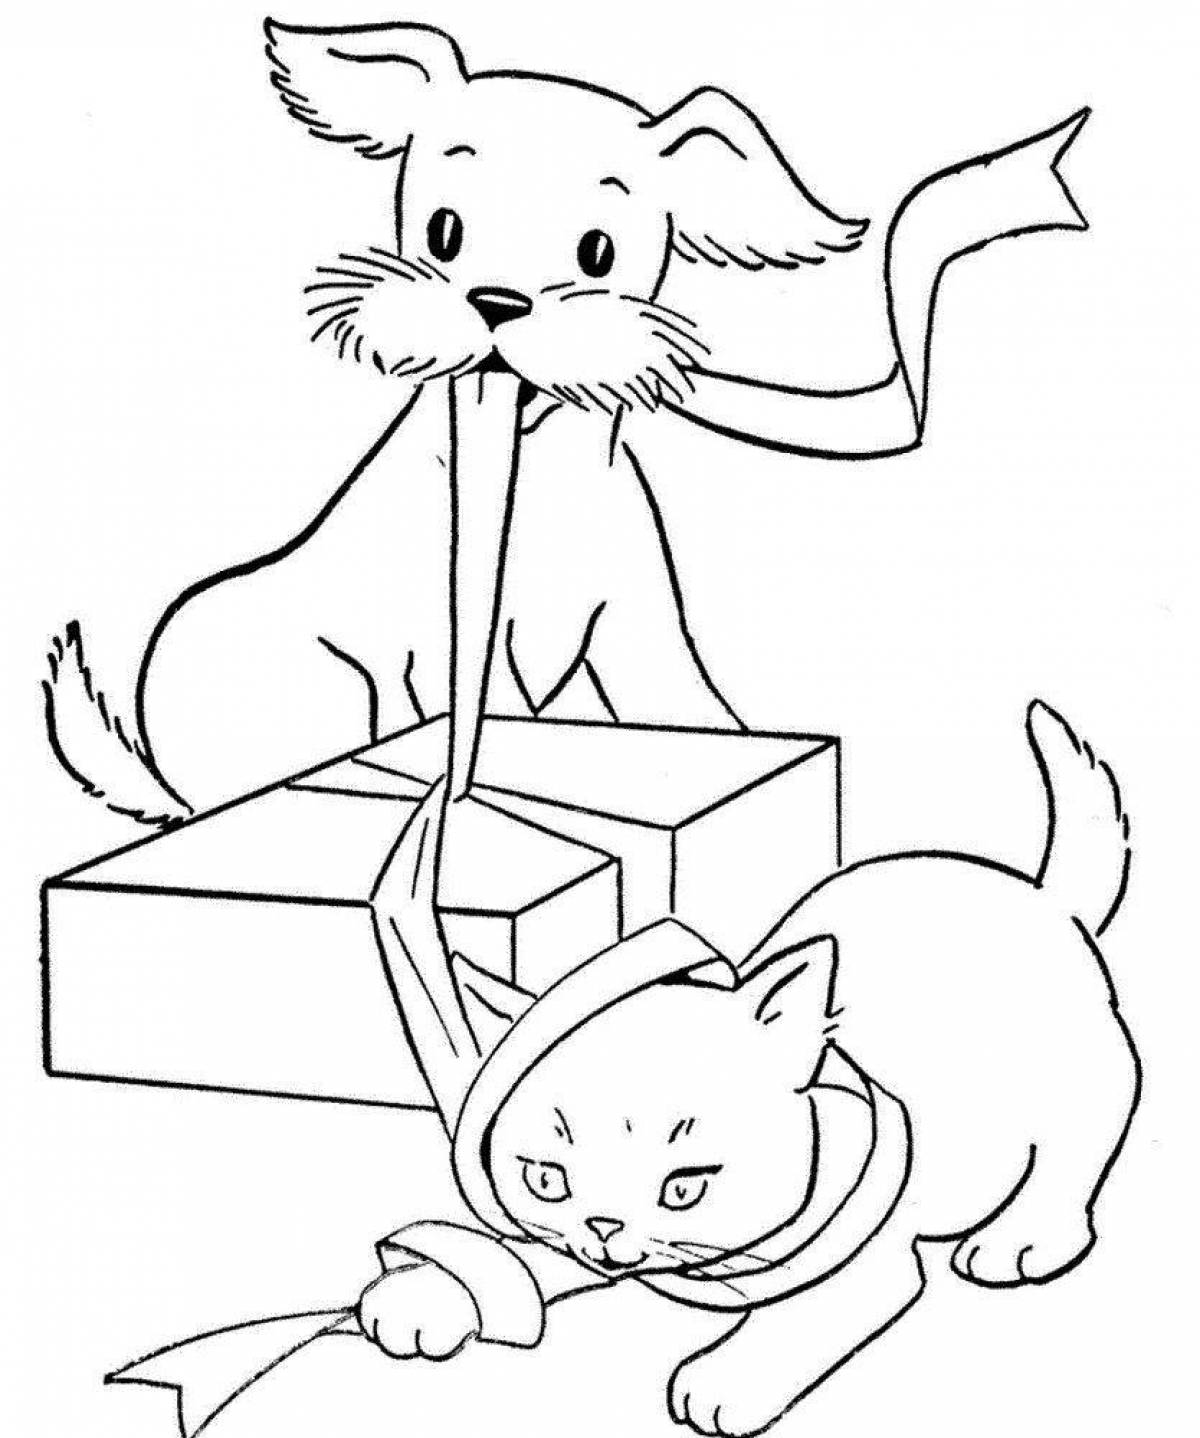 Coloring page loving kitten and dog